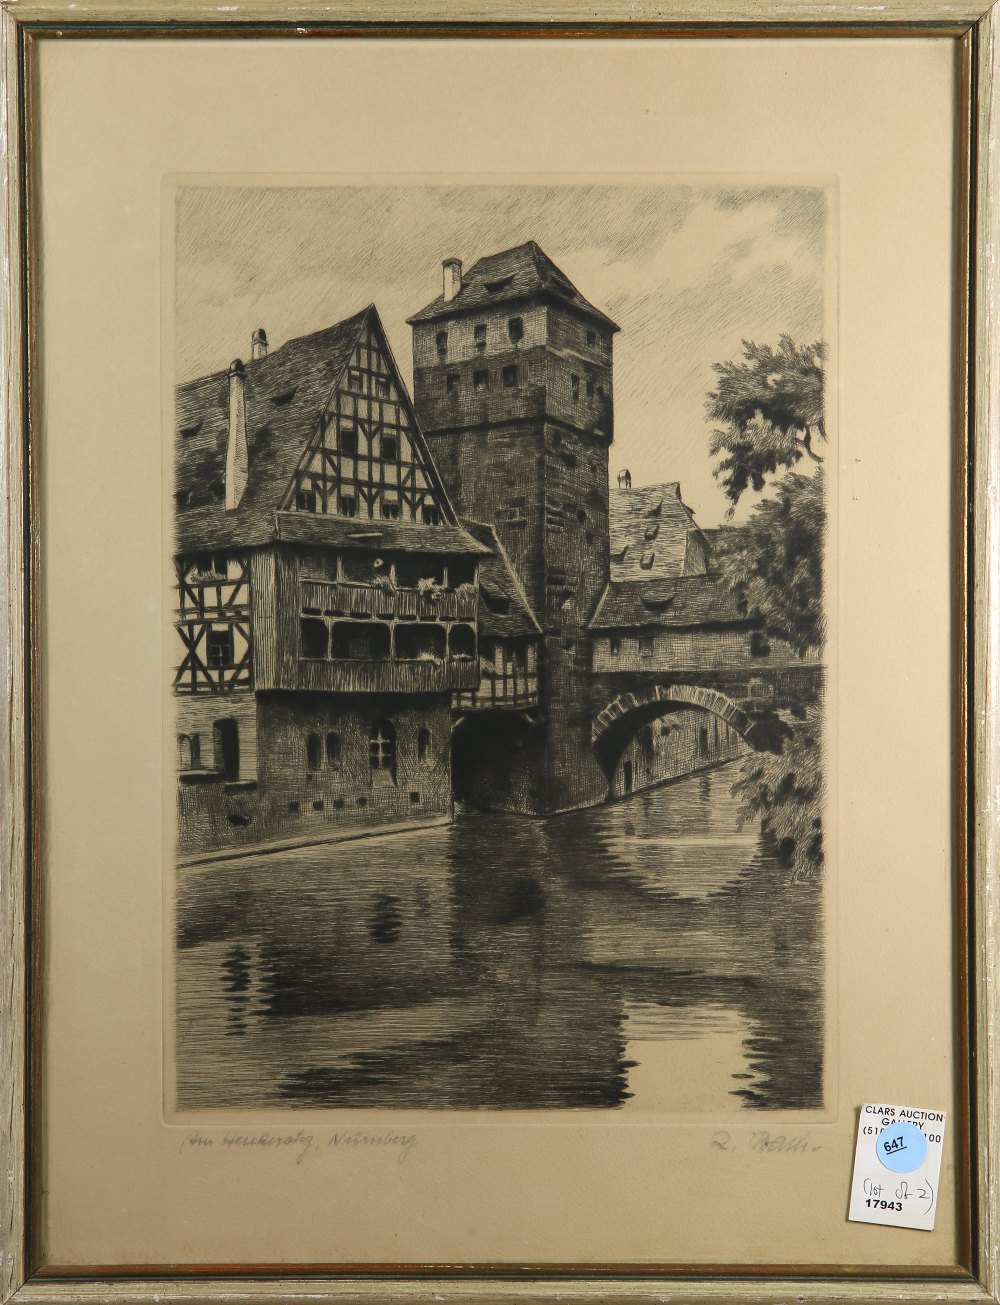 (lot of 2) Continental School (19th/20th centuries), Am Heidelberg, Nuremberg, etching, signed - Image 2 of 2